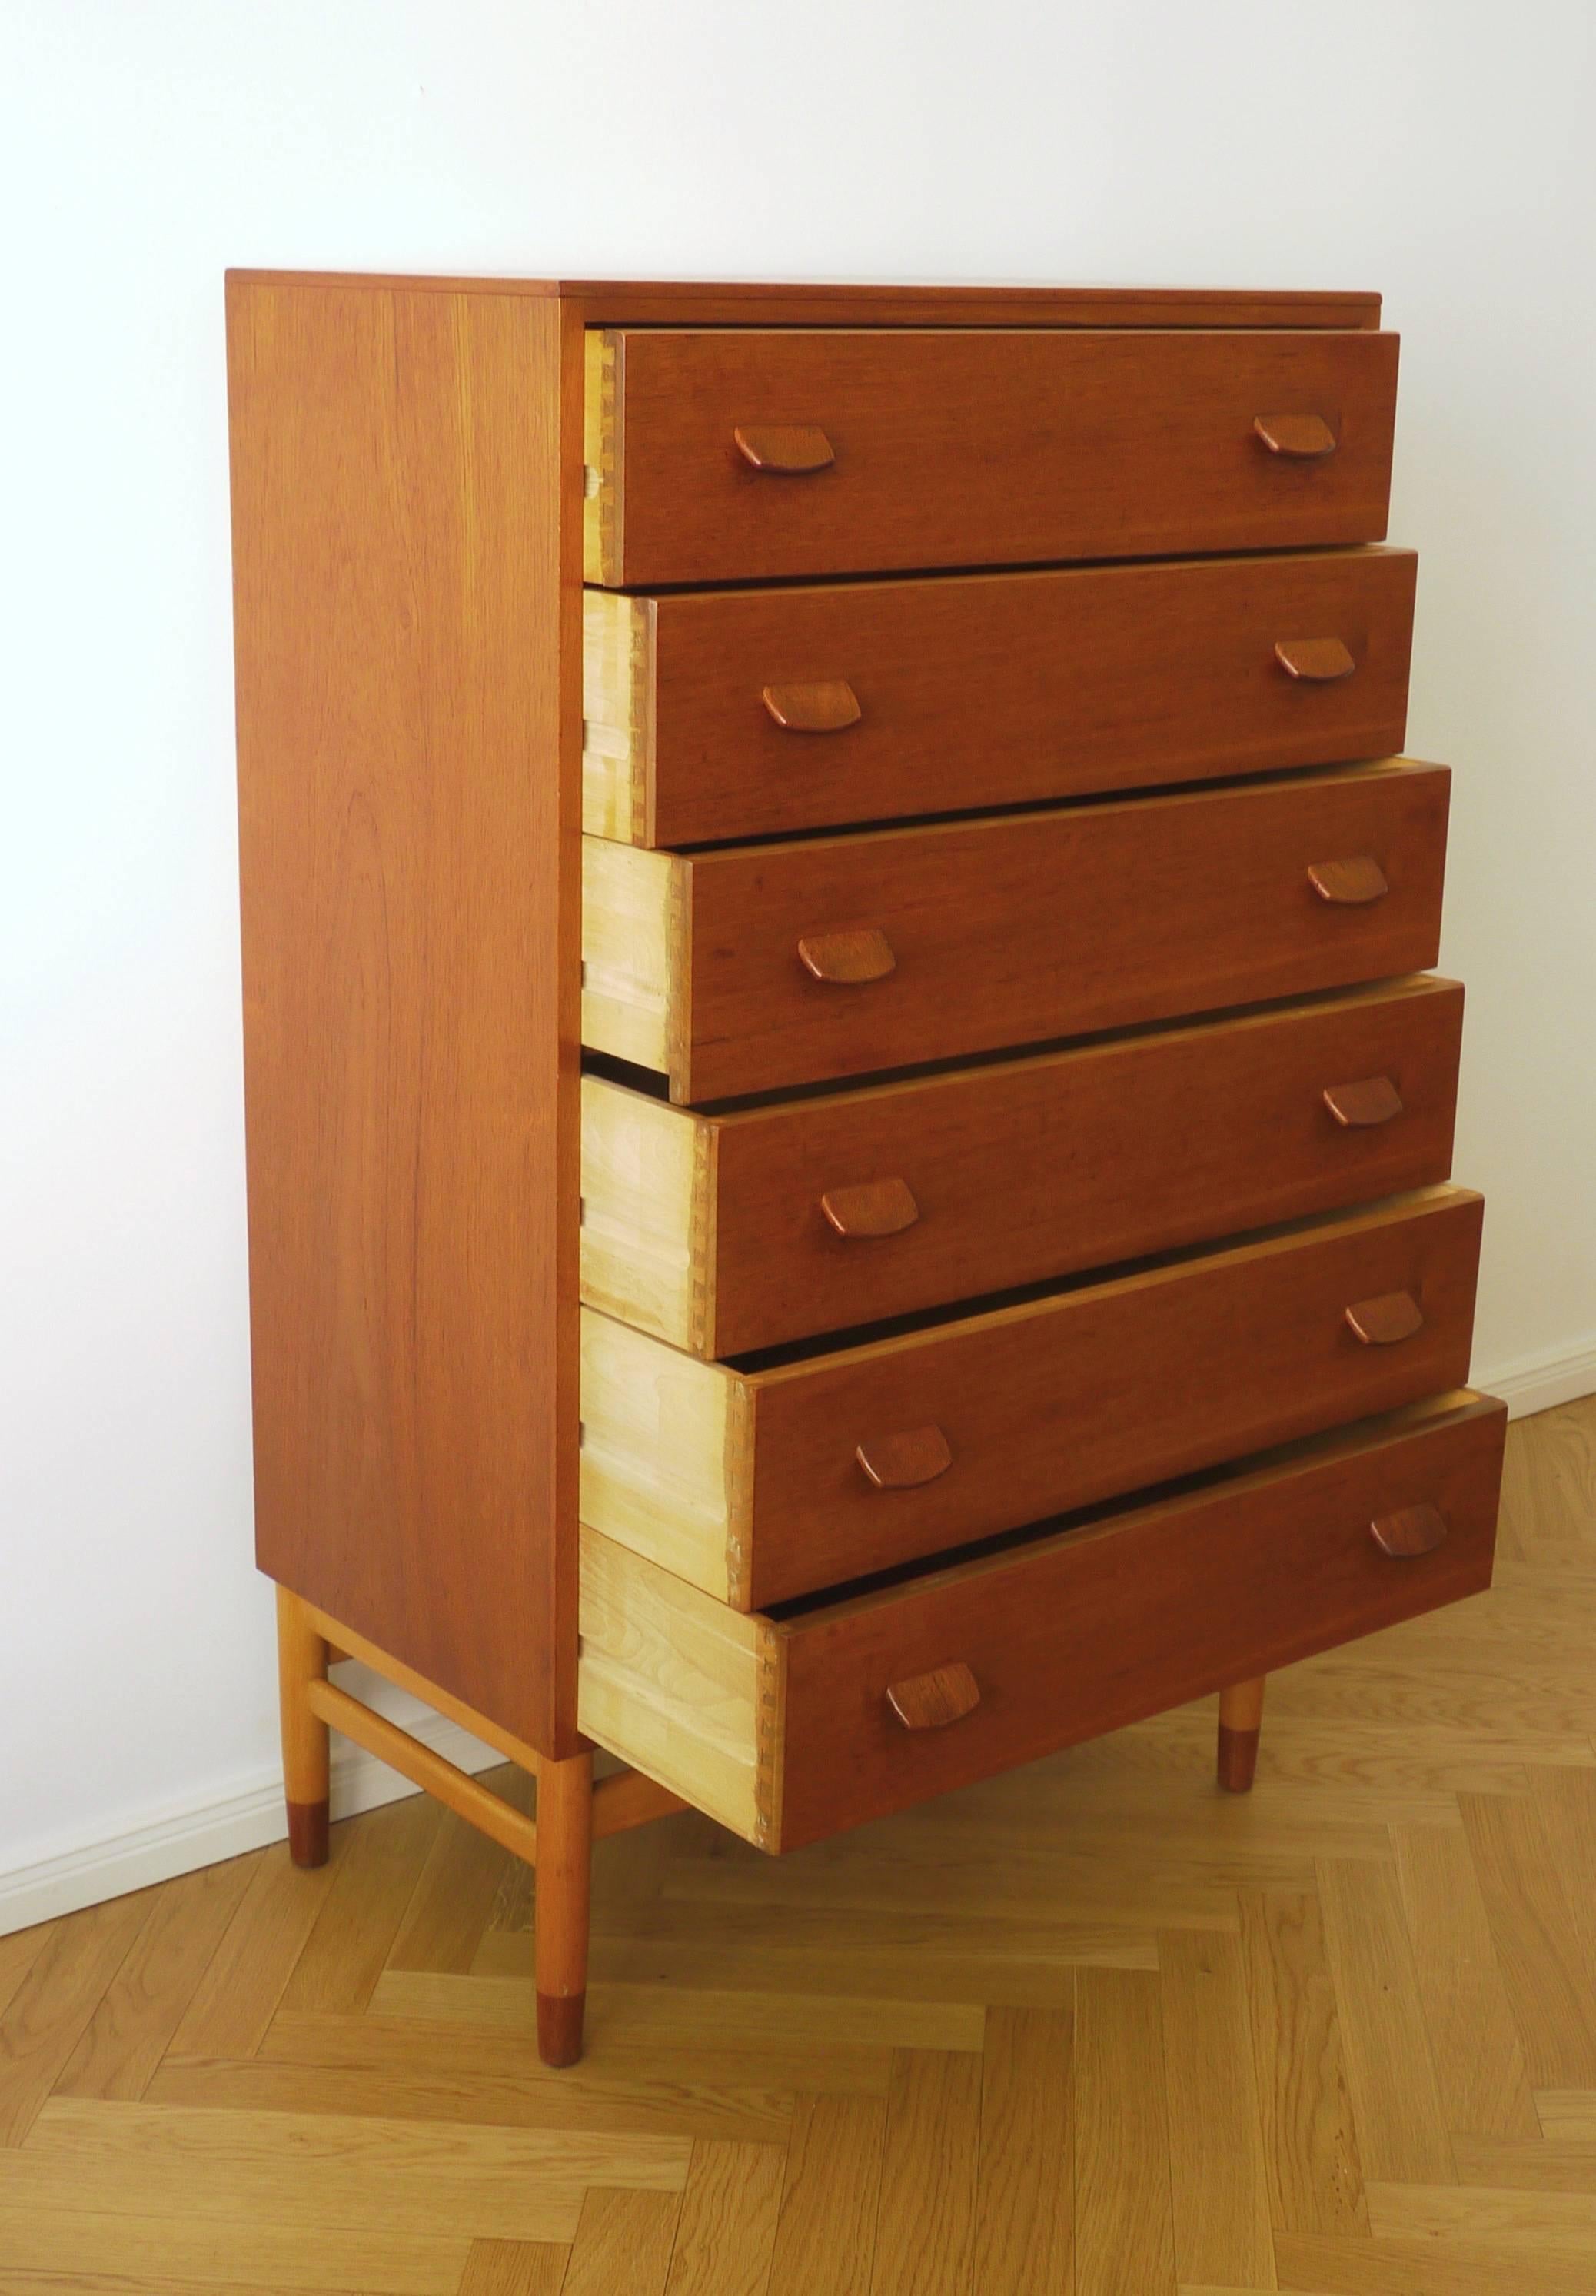 High chest of drawers, Model F17, designed by Poul M. Volther. Produced by FDB Møbelfabrik in the 1960s. The high shelf offers six drawers, it is made of teak and veneered surfaces and is standing on a base of beech legs finishing in teak.
 